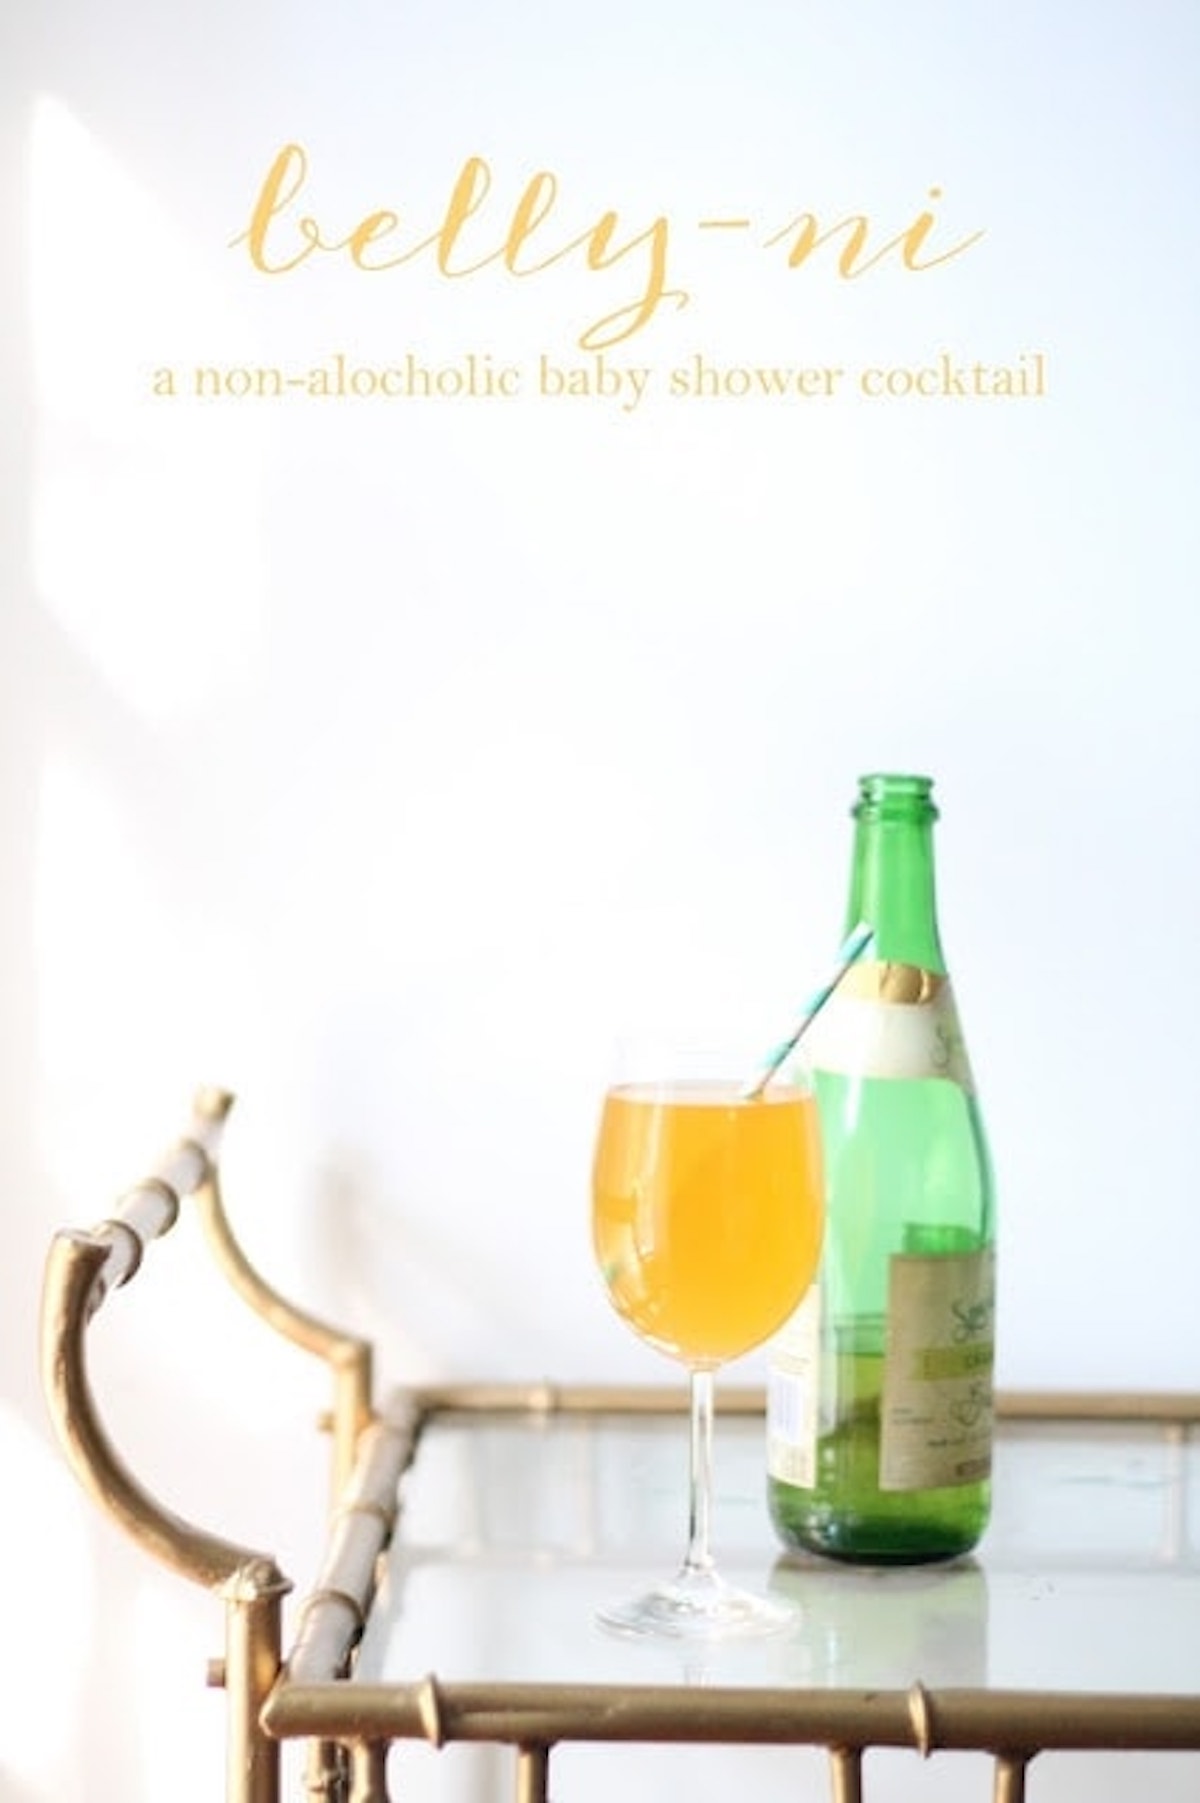 A non-alcoholic baby shower cocktail, cleverly named "belly-ni," is presented in a glass beside a green bottle on a gold-colored tray table.